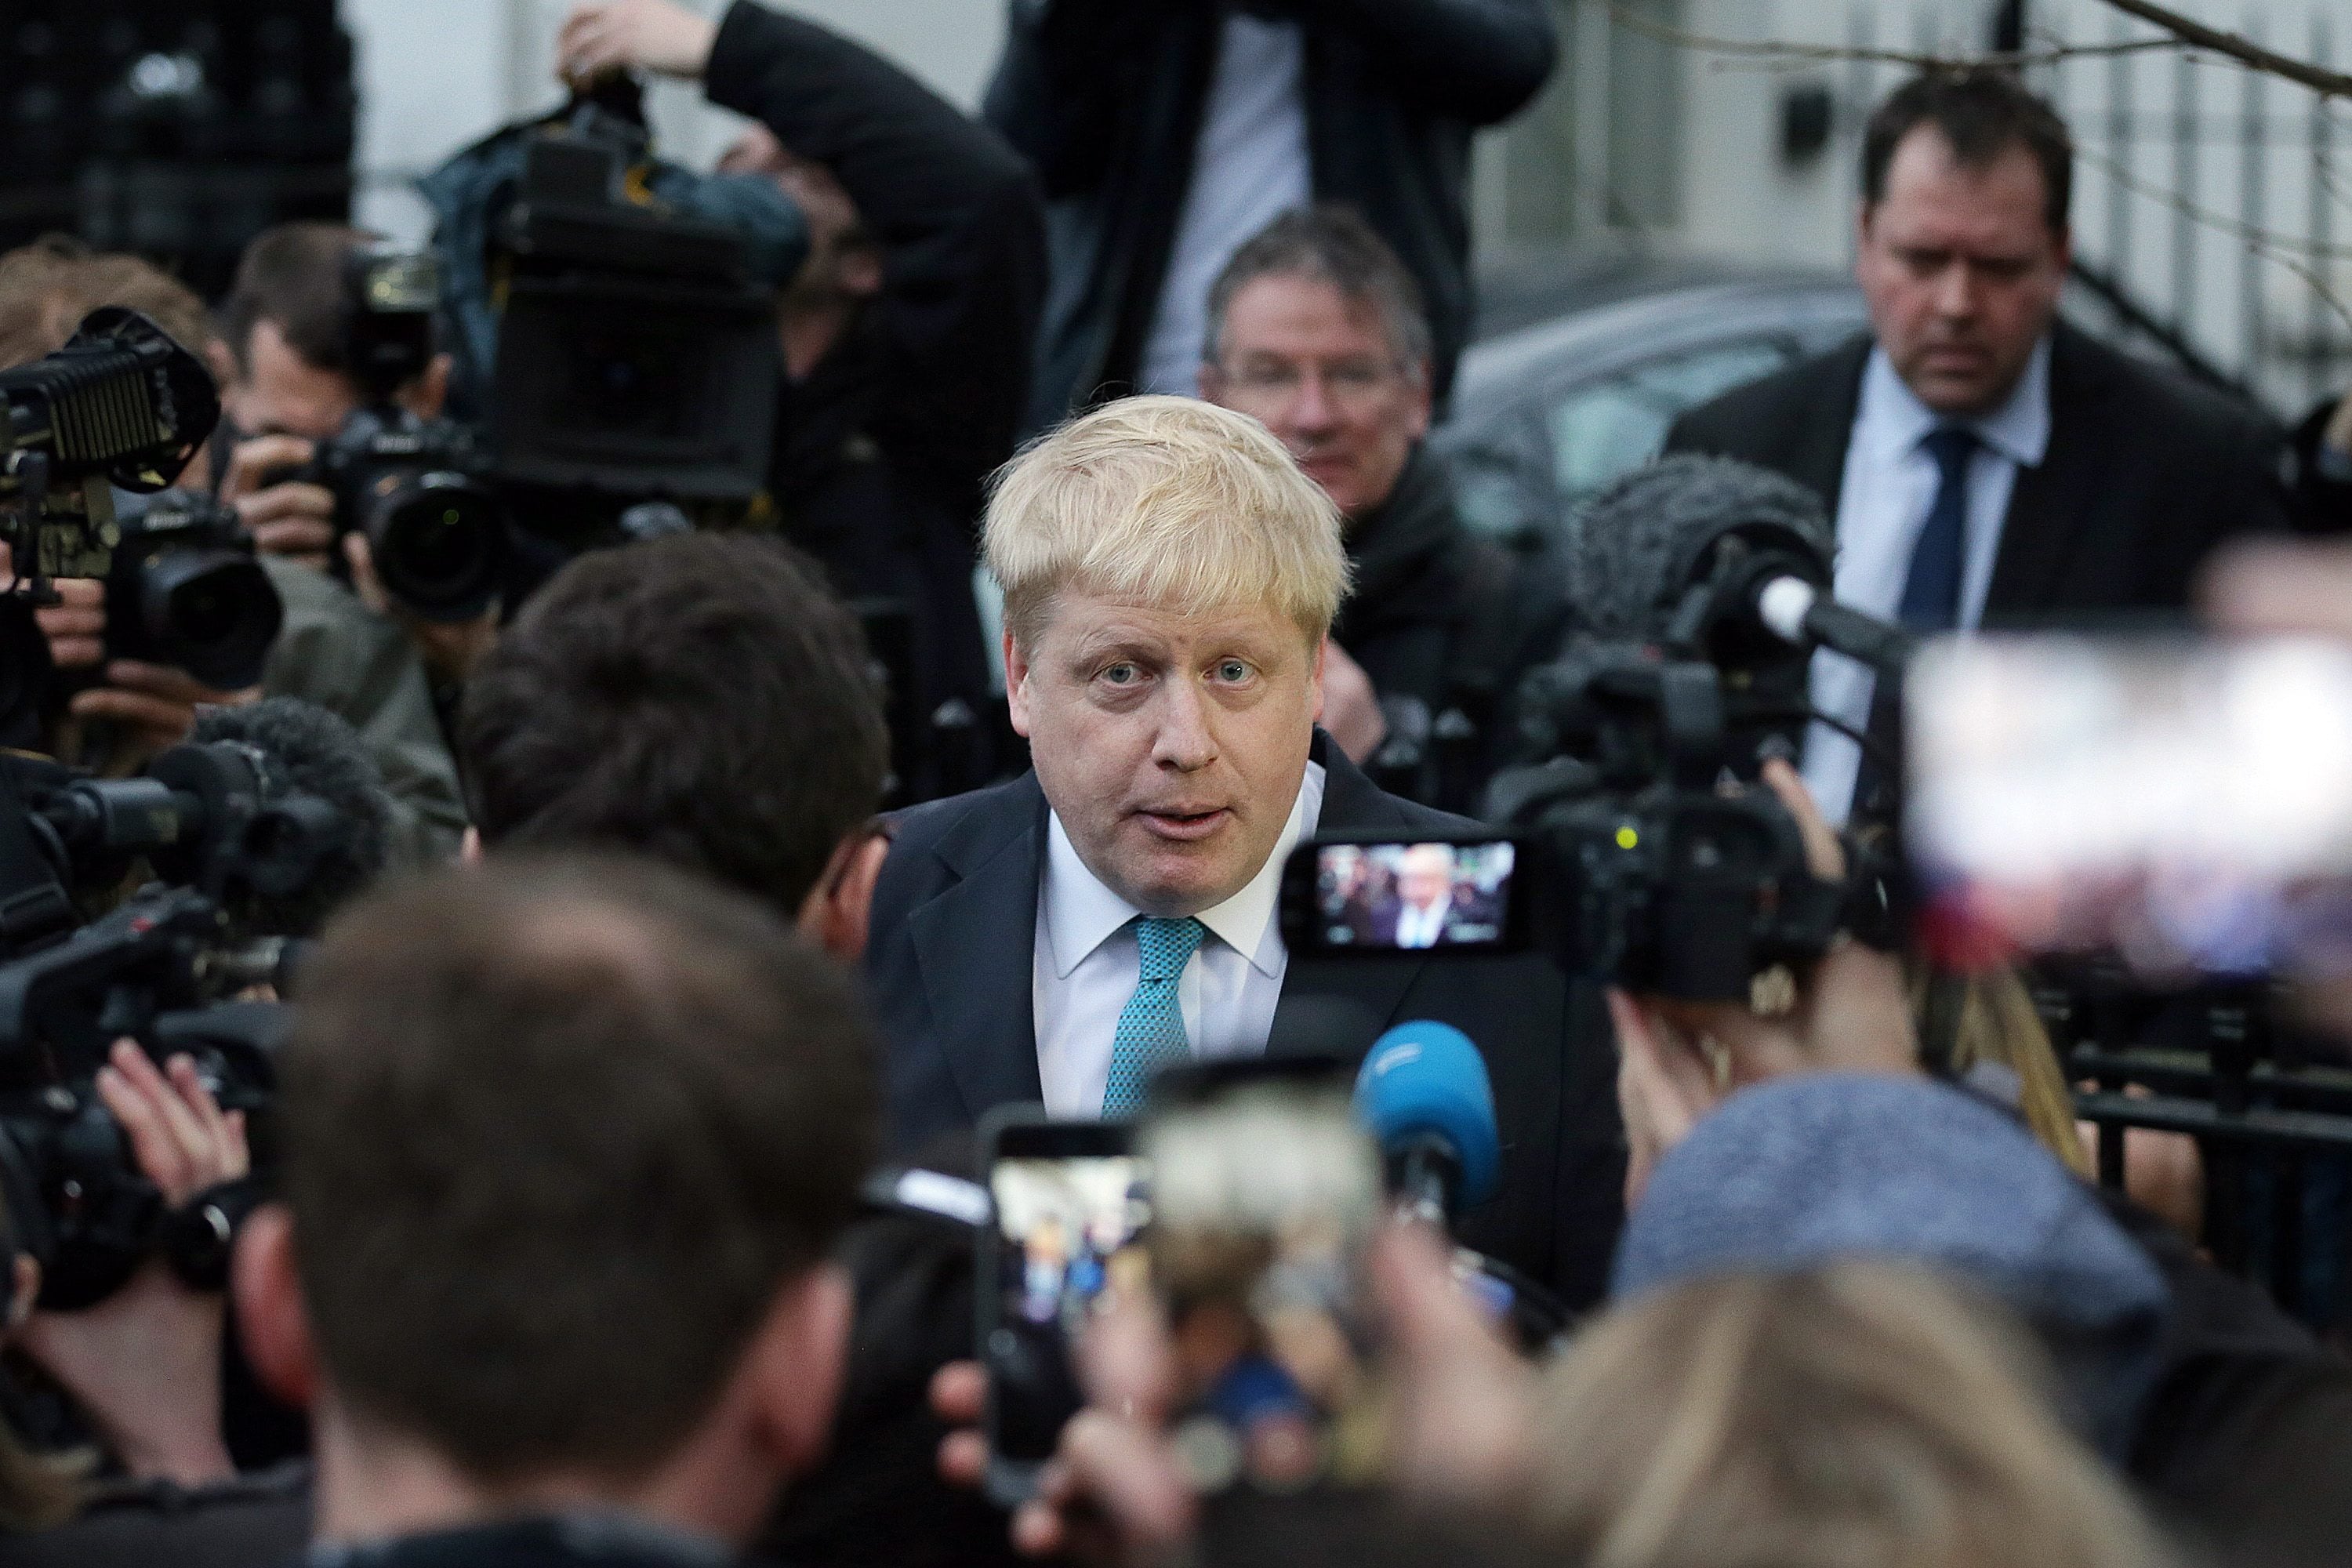 London Mayor Boris Johnson makes a statement outside his home in London on Sunday. London Mayor Boris Johnson said Sunday he is joining a campaign to encourage Britain to leave the European Union.